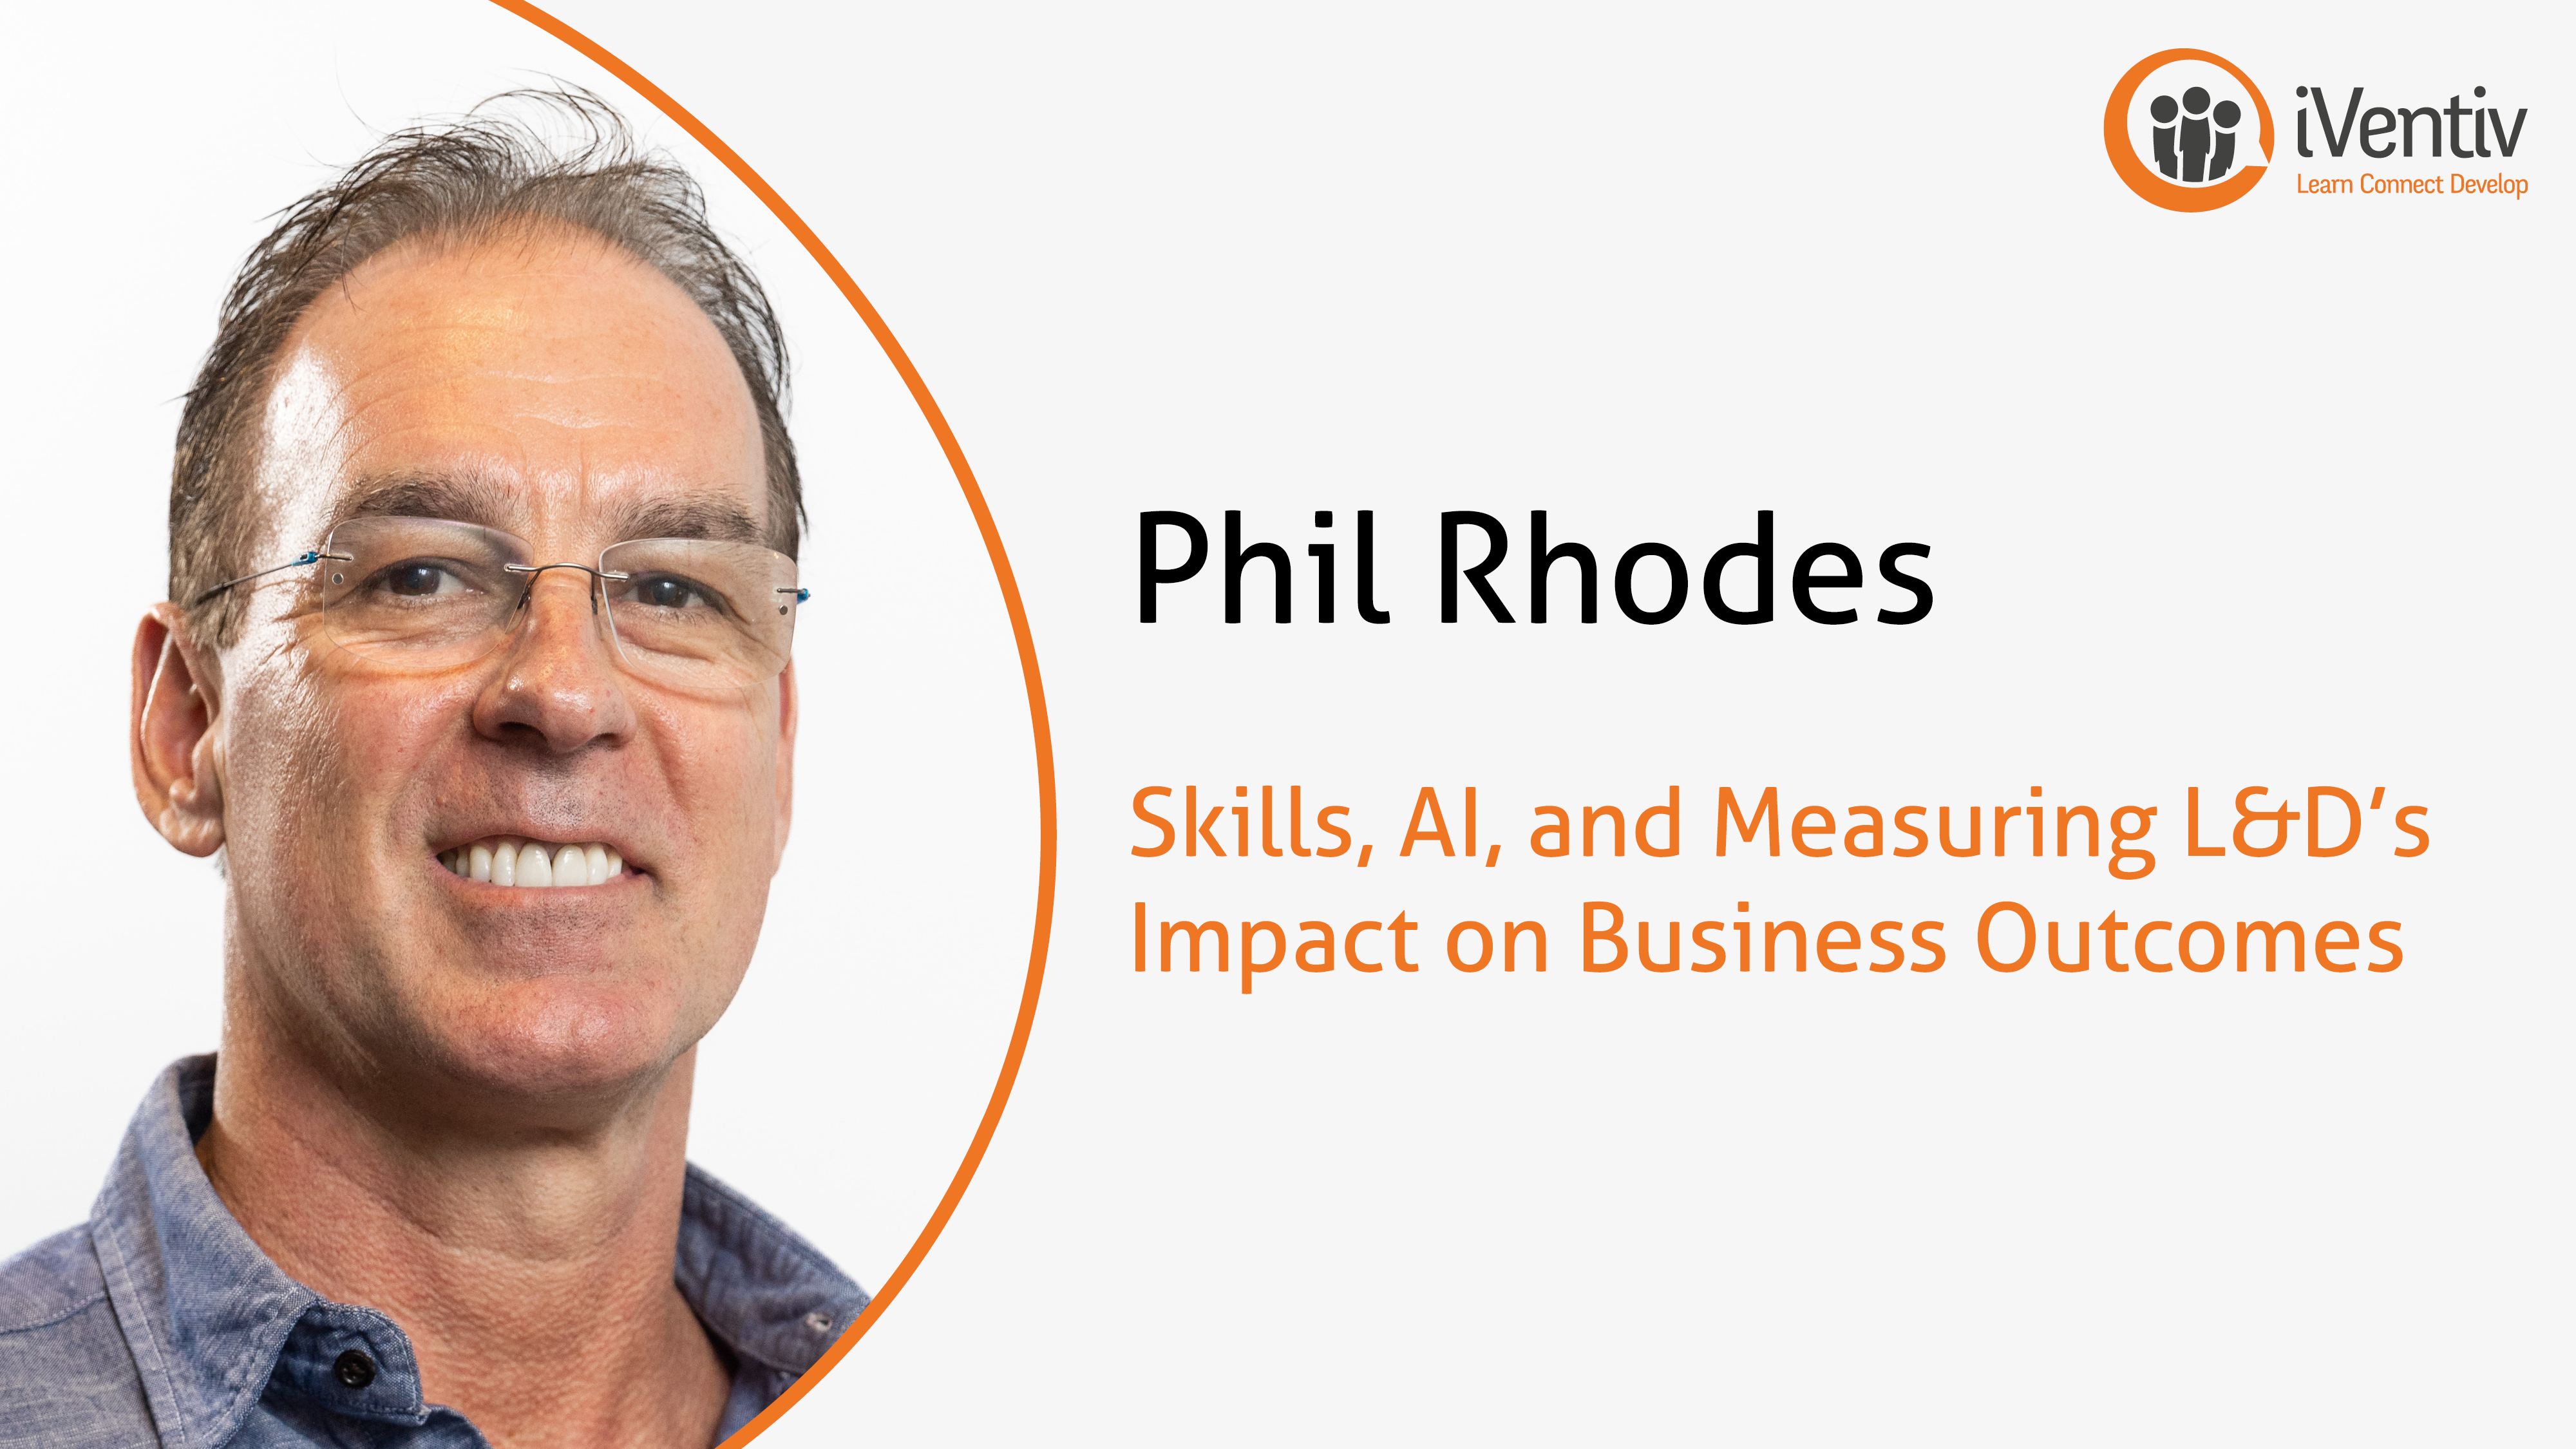 Phil Rhodes, WM, with the title Sklls, AI, and Measuring L&D's Impact on Business Outcomes